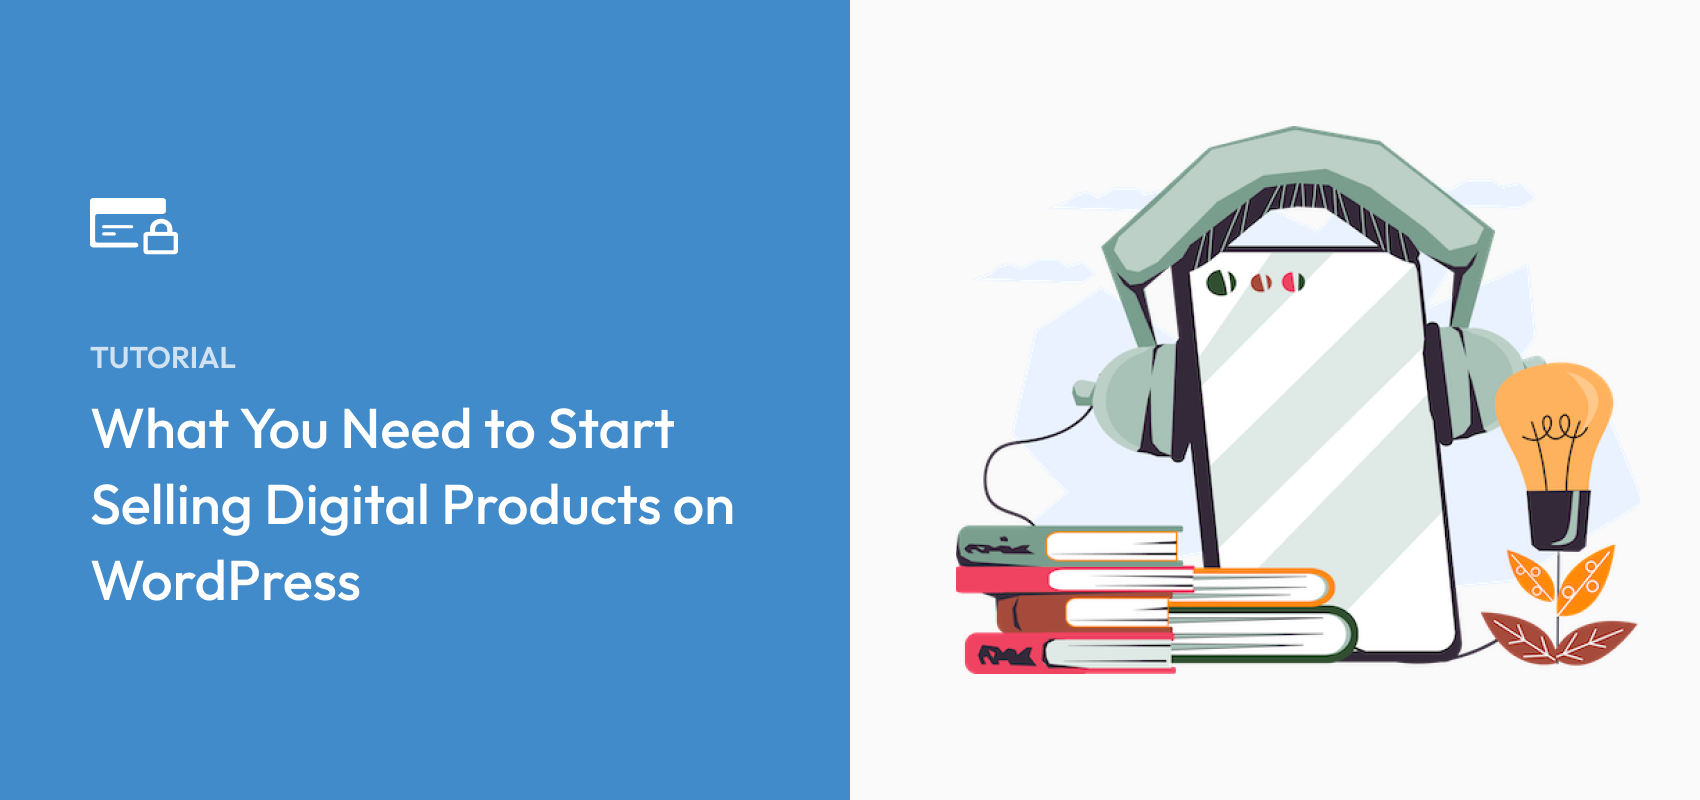 What You Need to Start Selling Digital Products on WordPress